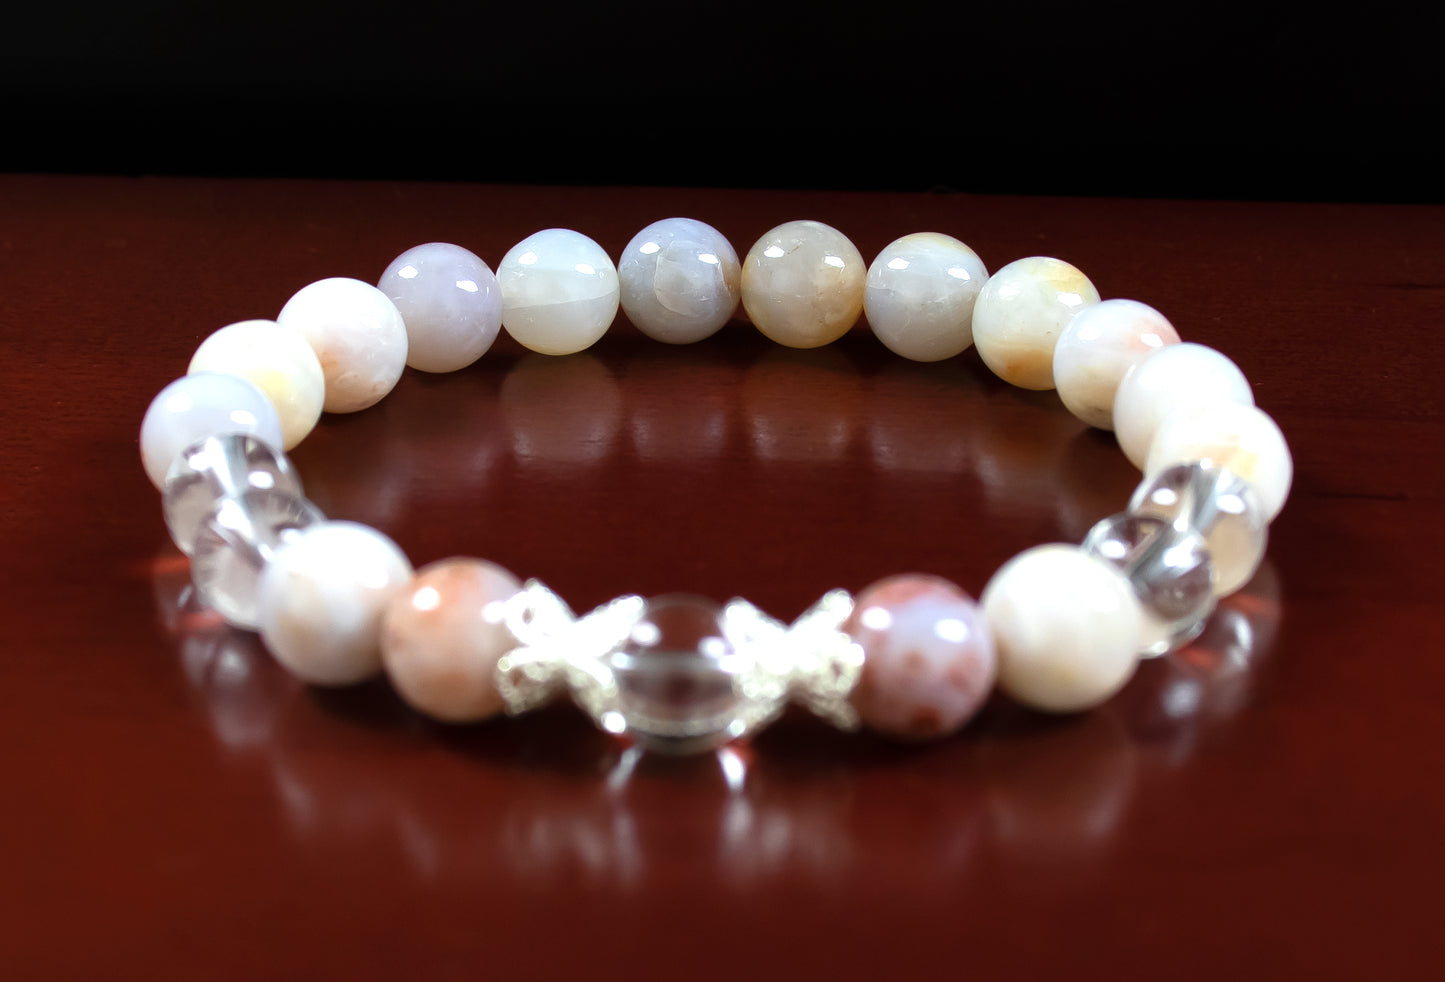 Stability/Clarity - AAA Quality Clear Quartz/AAA Quality Australian Agate/.925 Sterling Silver Accents - 8mm